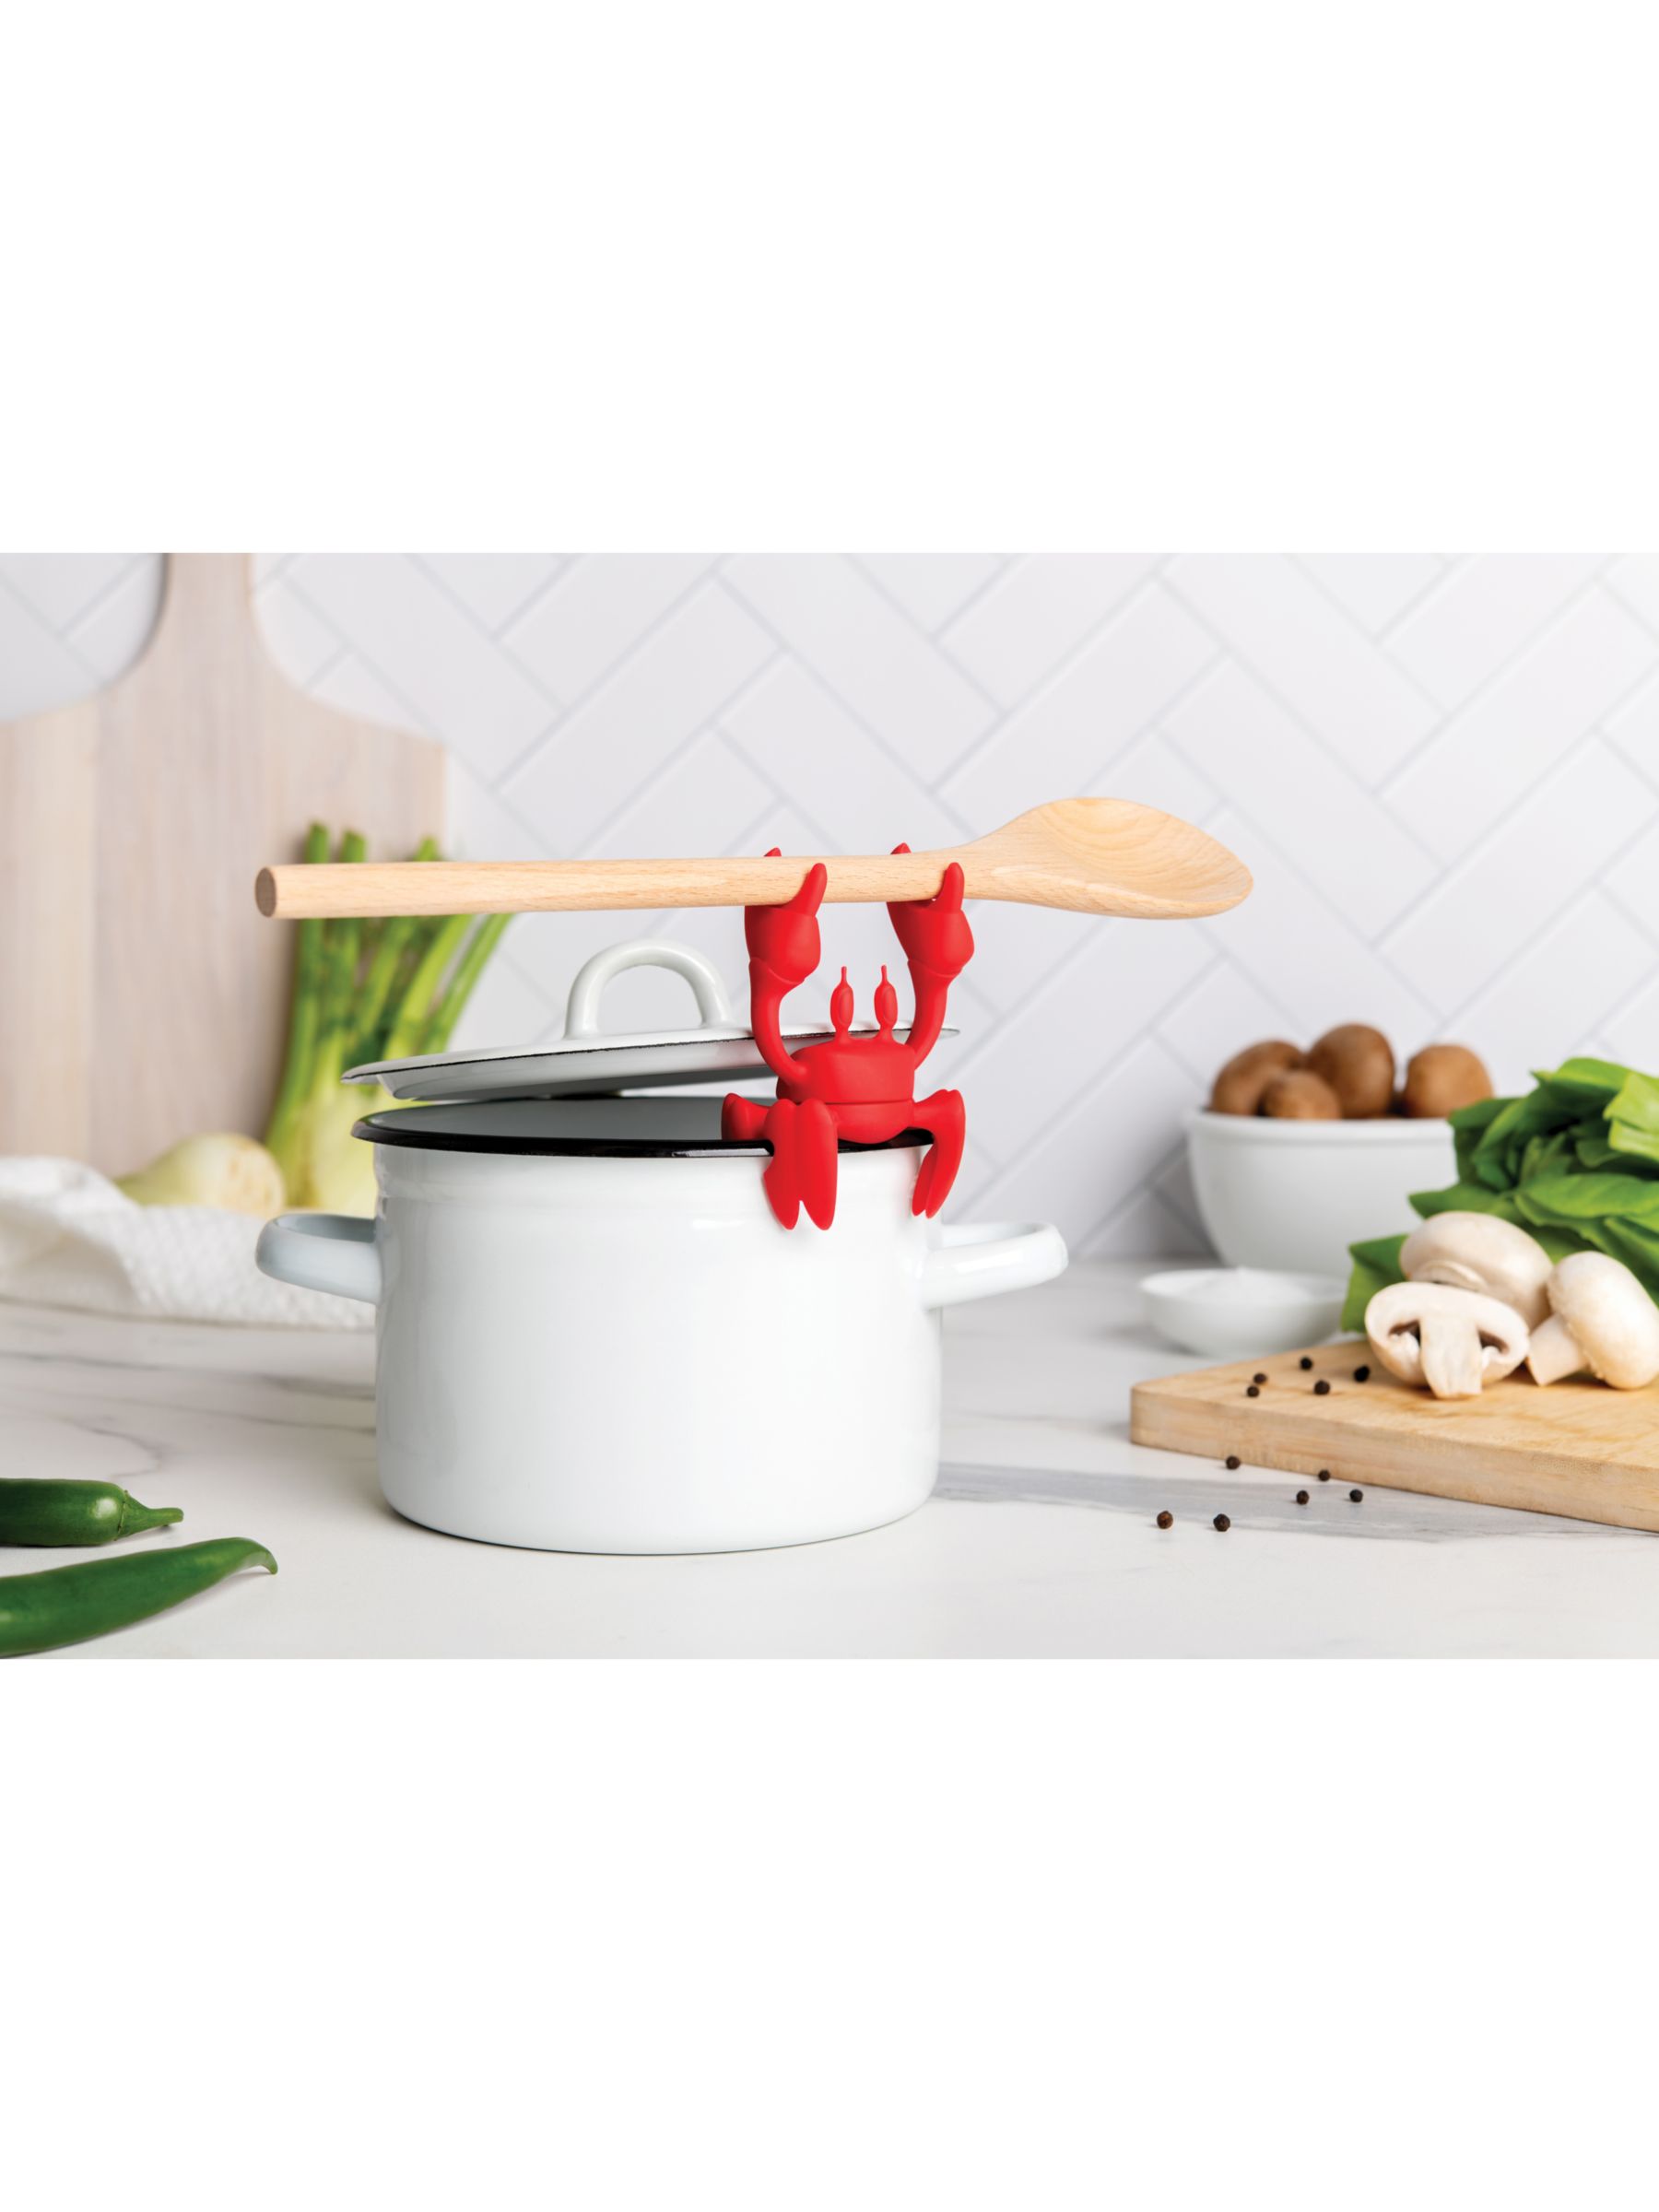 OTOTO Red Cooking Spoon Holder Crab New/Boxed Silicone Tray Funny Kitchen  Tools